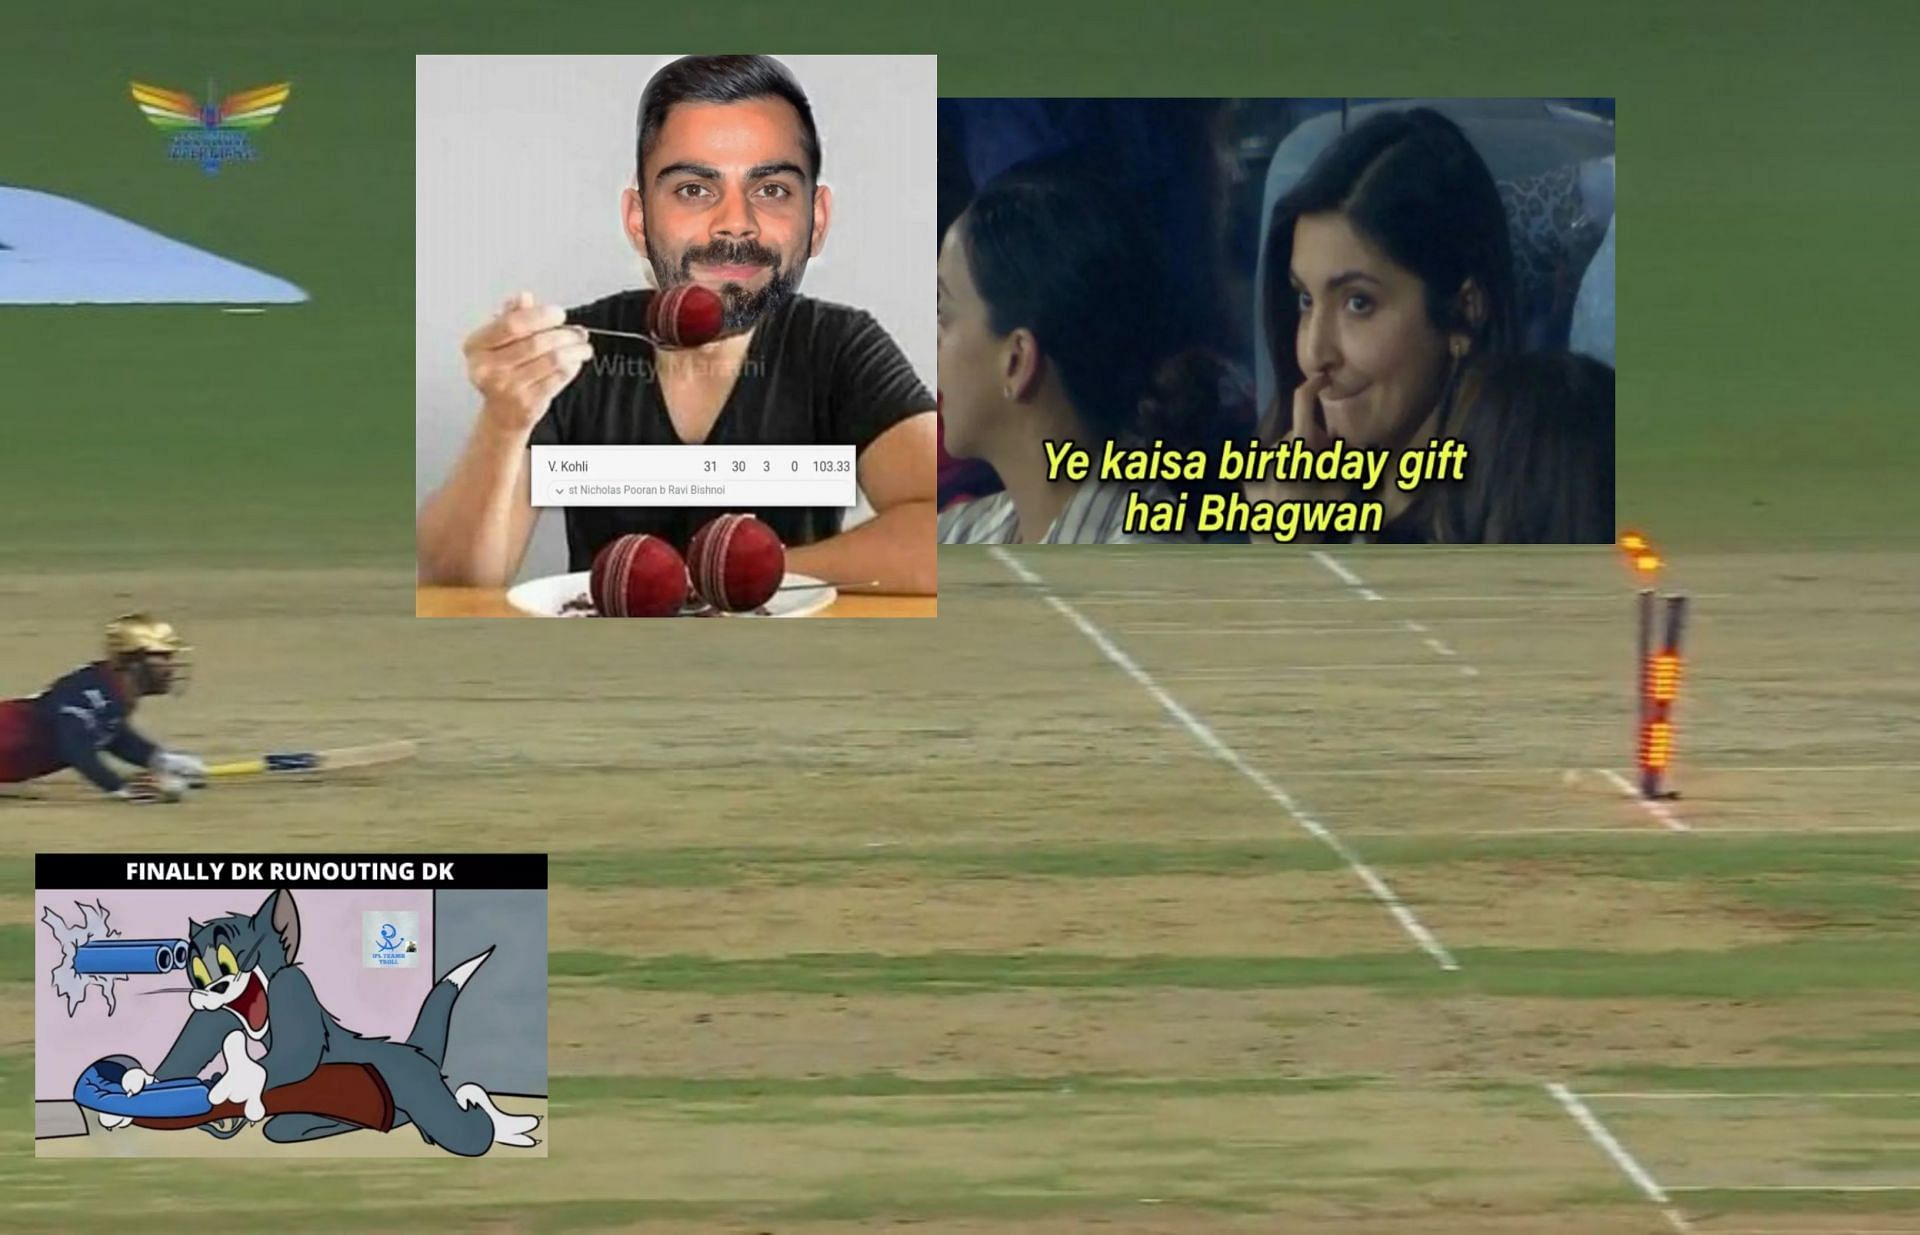 Top 10 funny memes from the 1st innings of the latest match